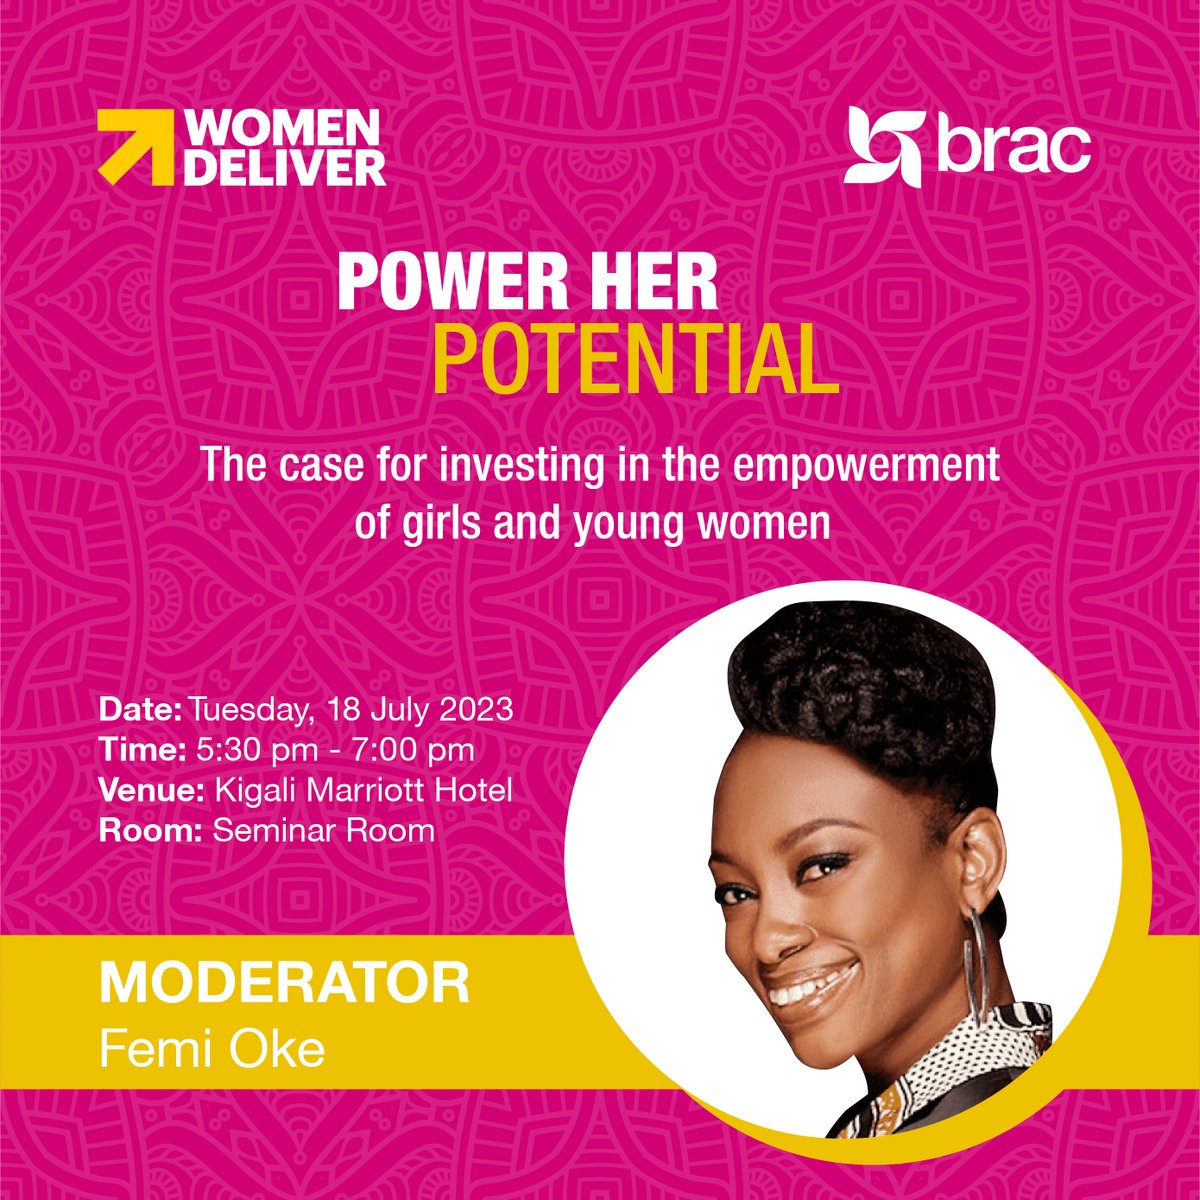 Award-winning journalist @FemiOke will moderate 'Power Her Potential' panel at @WomenDeliver 2023! Co-founder of moderatethepanel.com, host of @AJStream and #HIVunmuted podcast. #PowerHerPotential #GenderEquality #WD2023